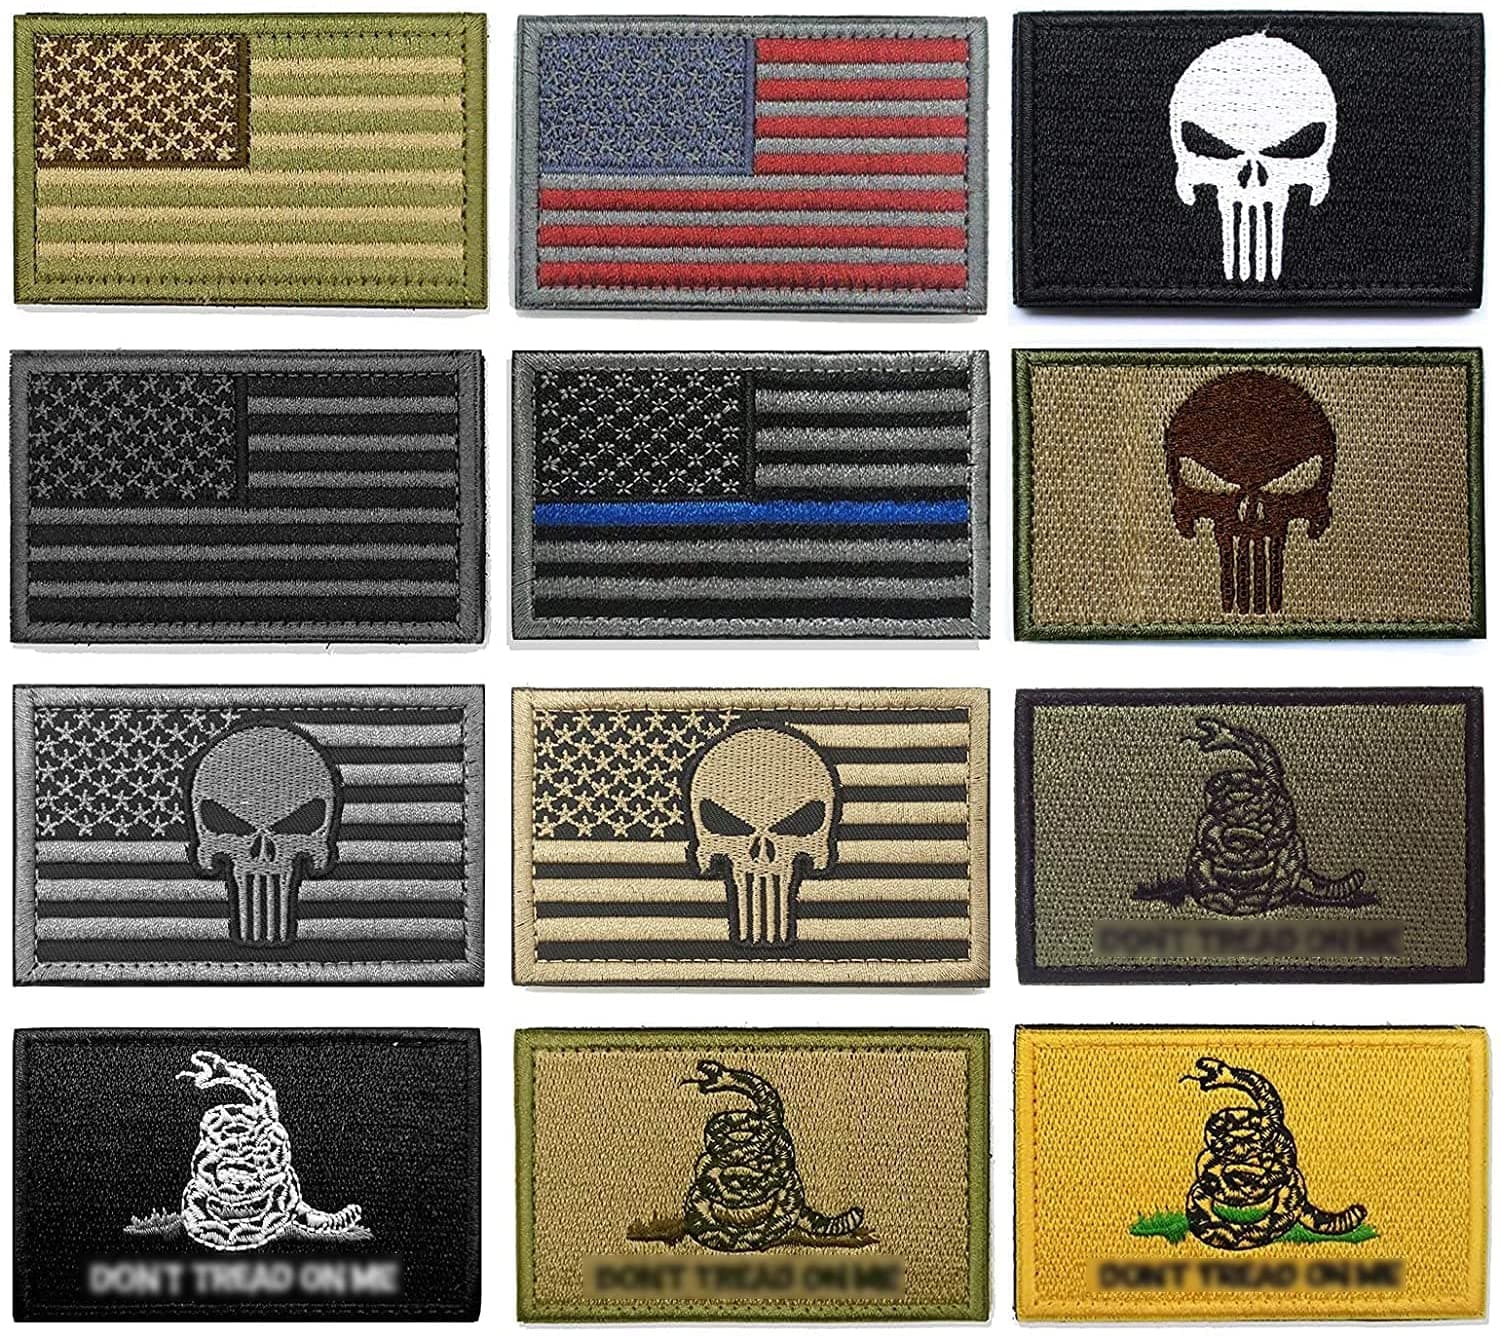 WZT 20 fun Tactical Army Morale patch full embroidery patch set